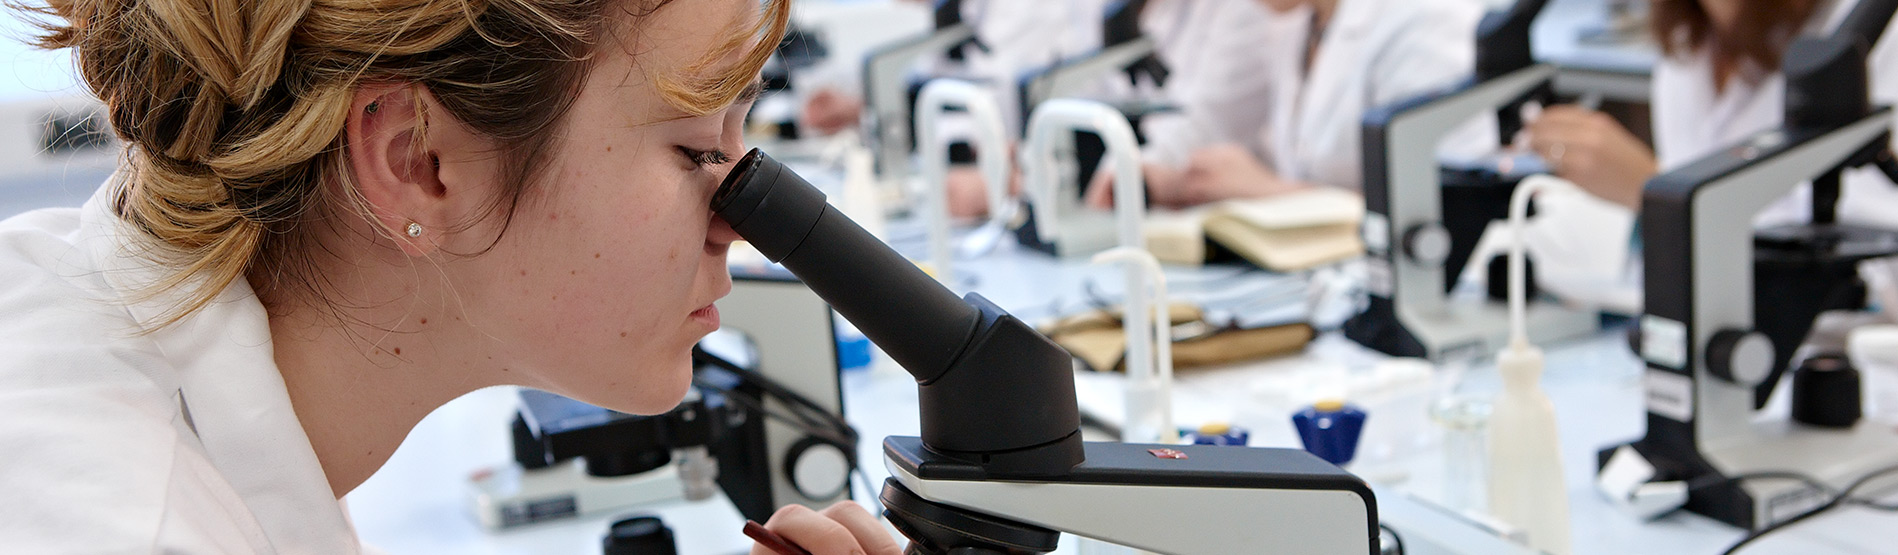 Students using microscopes in a lab.